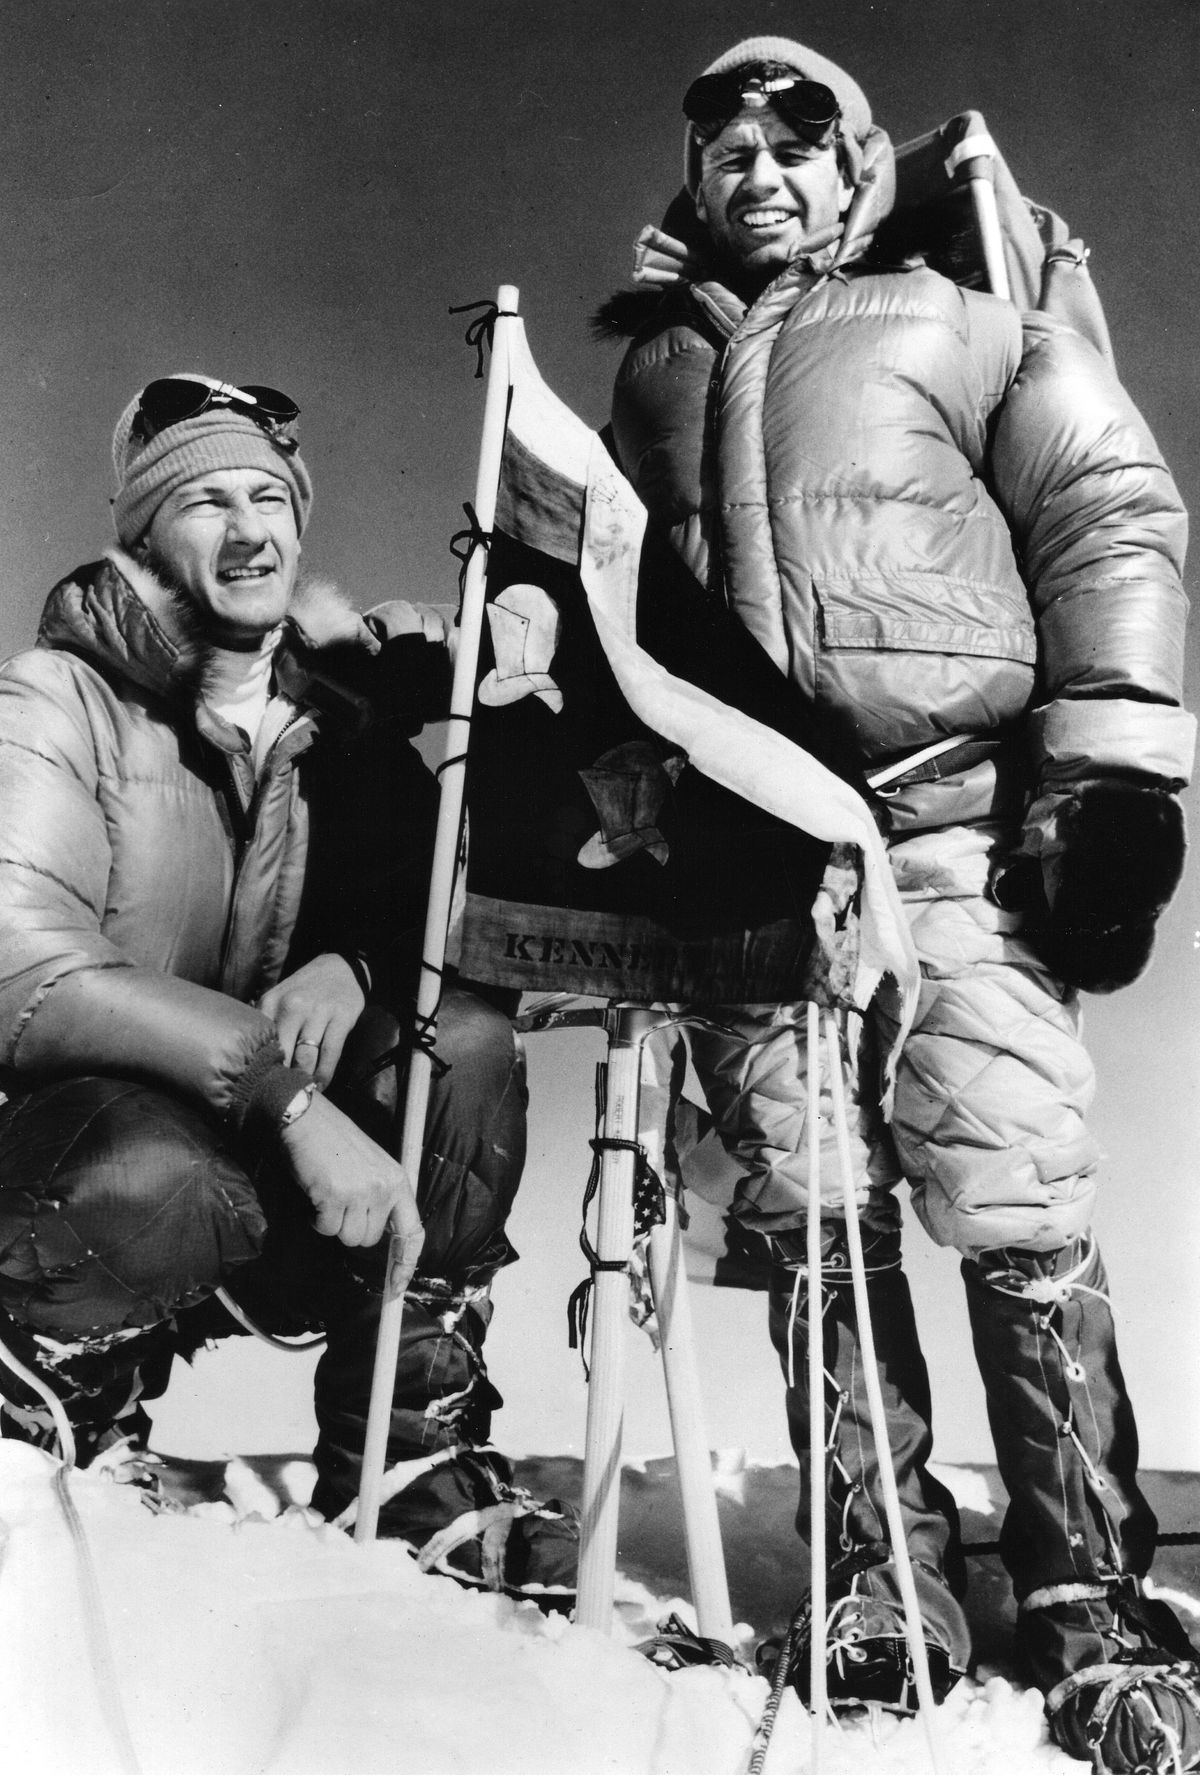 Jim Whittaker, left, and Robert Kennedy reach the summit of Mount Kennedy on March 24, 1965. (Albert Allard photo (National Geographic) courtesy of Whittaker Family Collection)